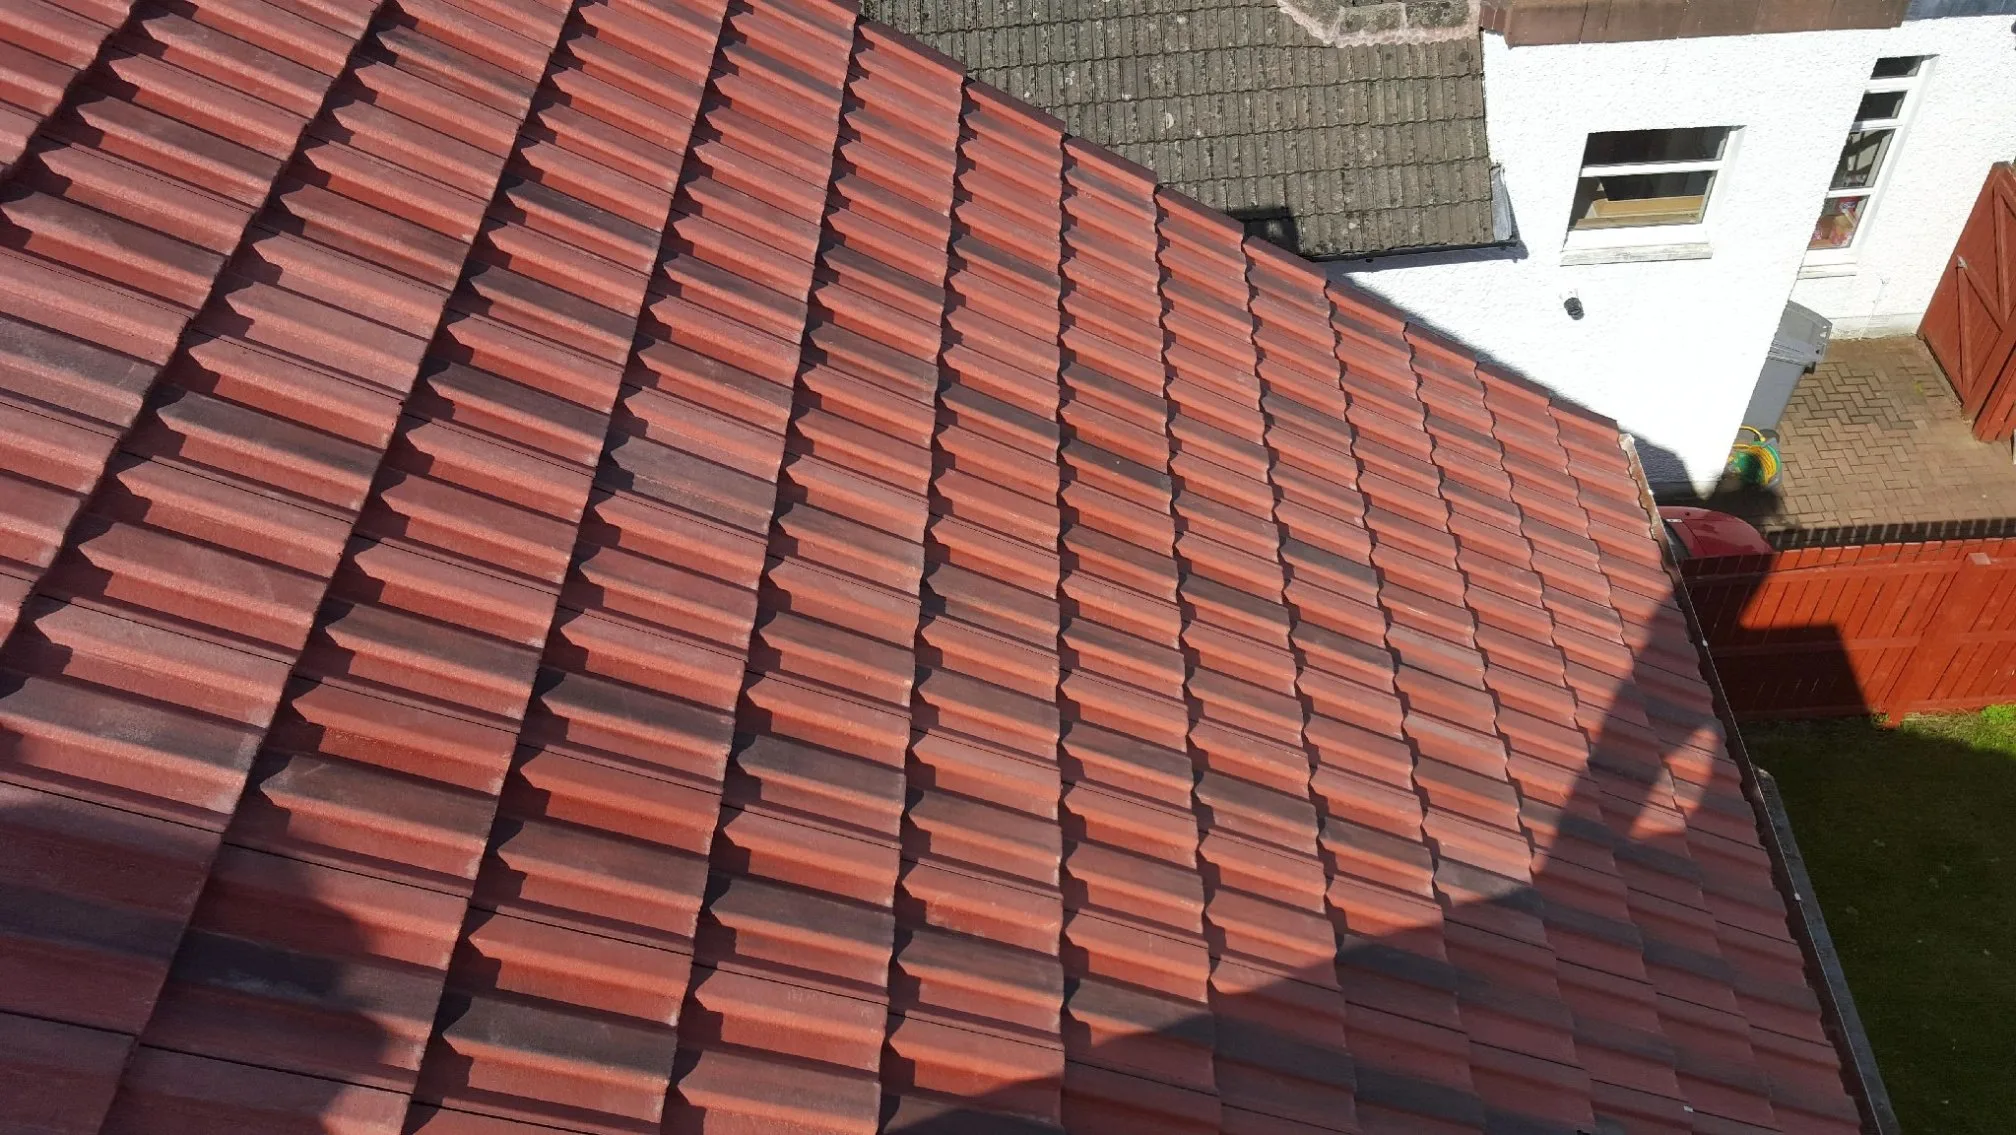 Cathcart Roofing Glasgow 01416 203808